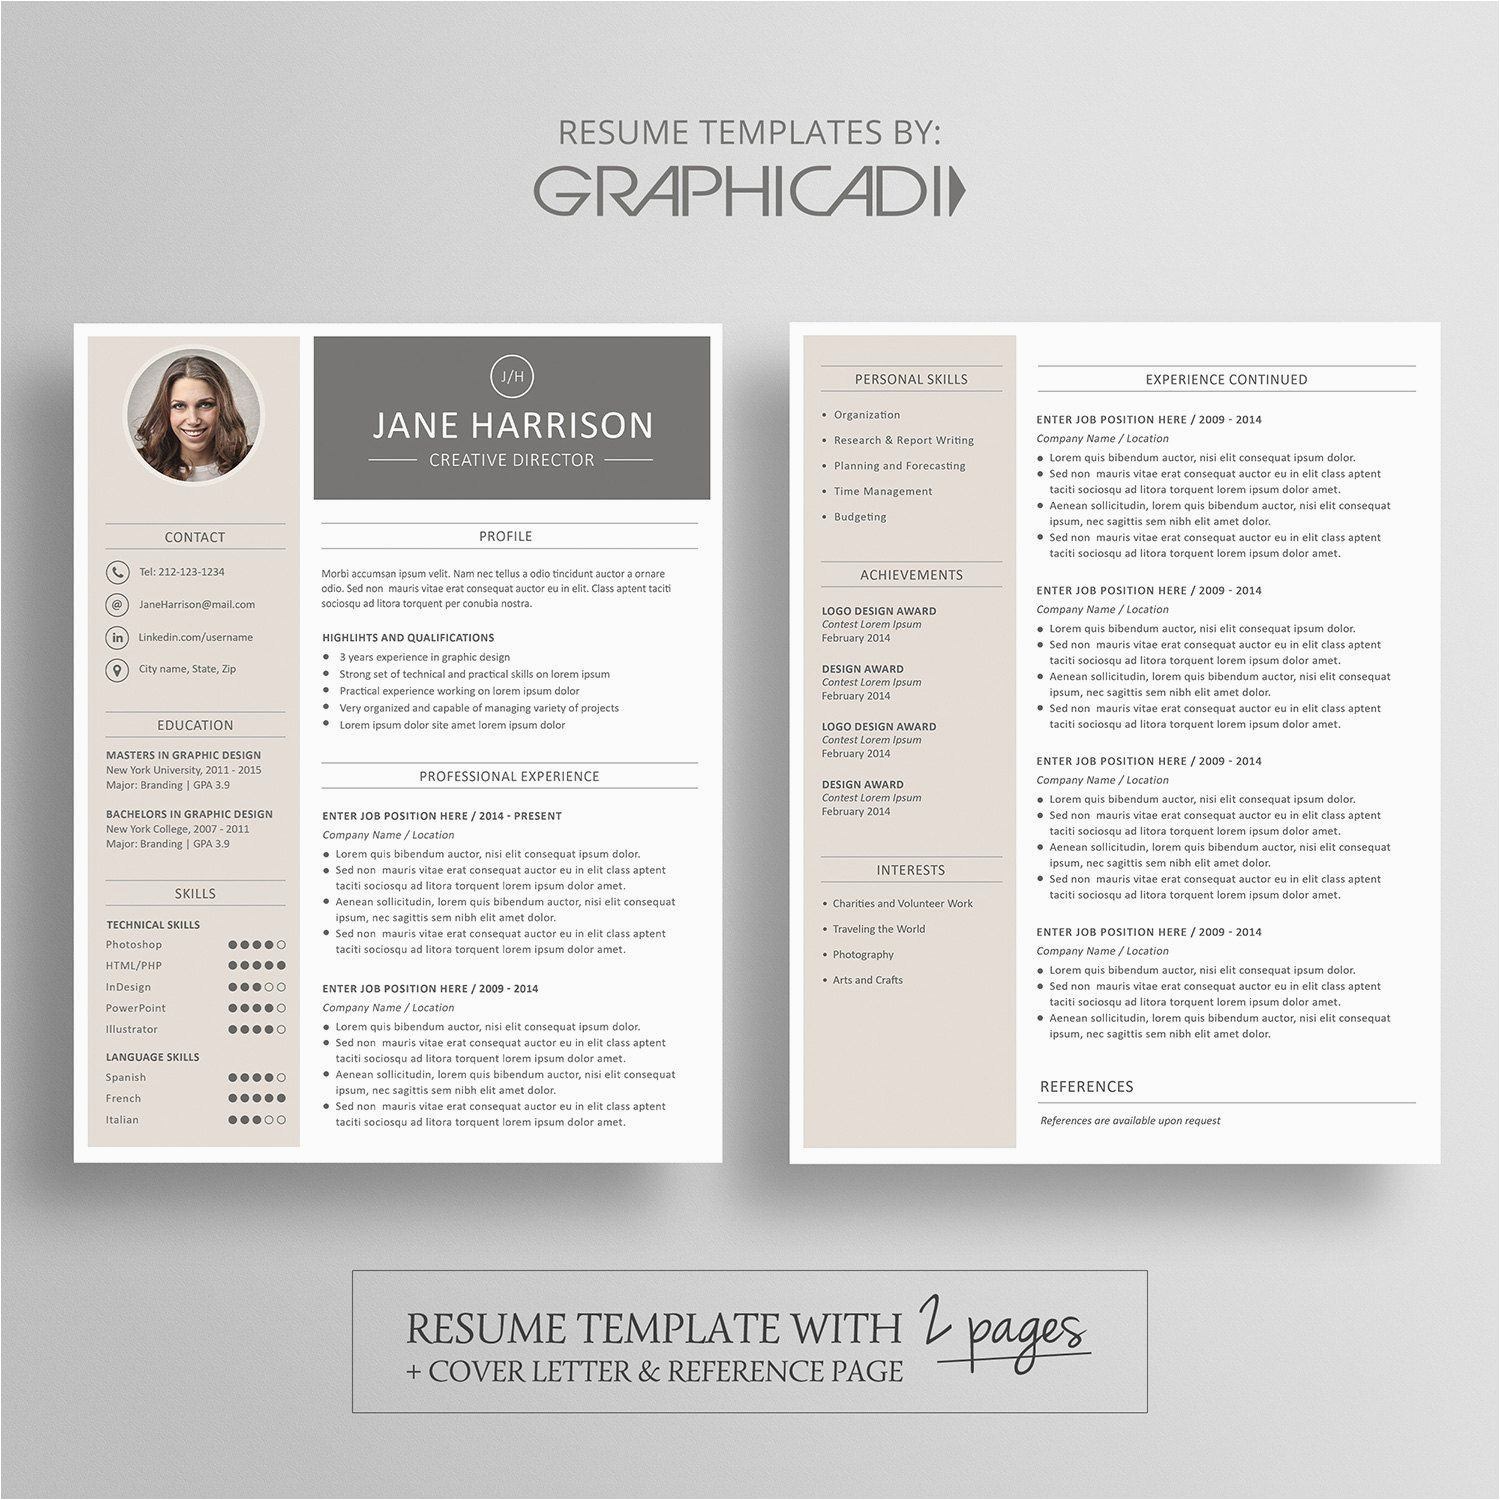 Free Resume Templates that Can Be Downloaded 2 Page Resume Template Free Word Modern Resume